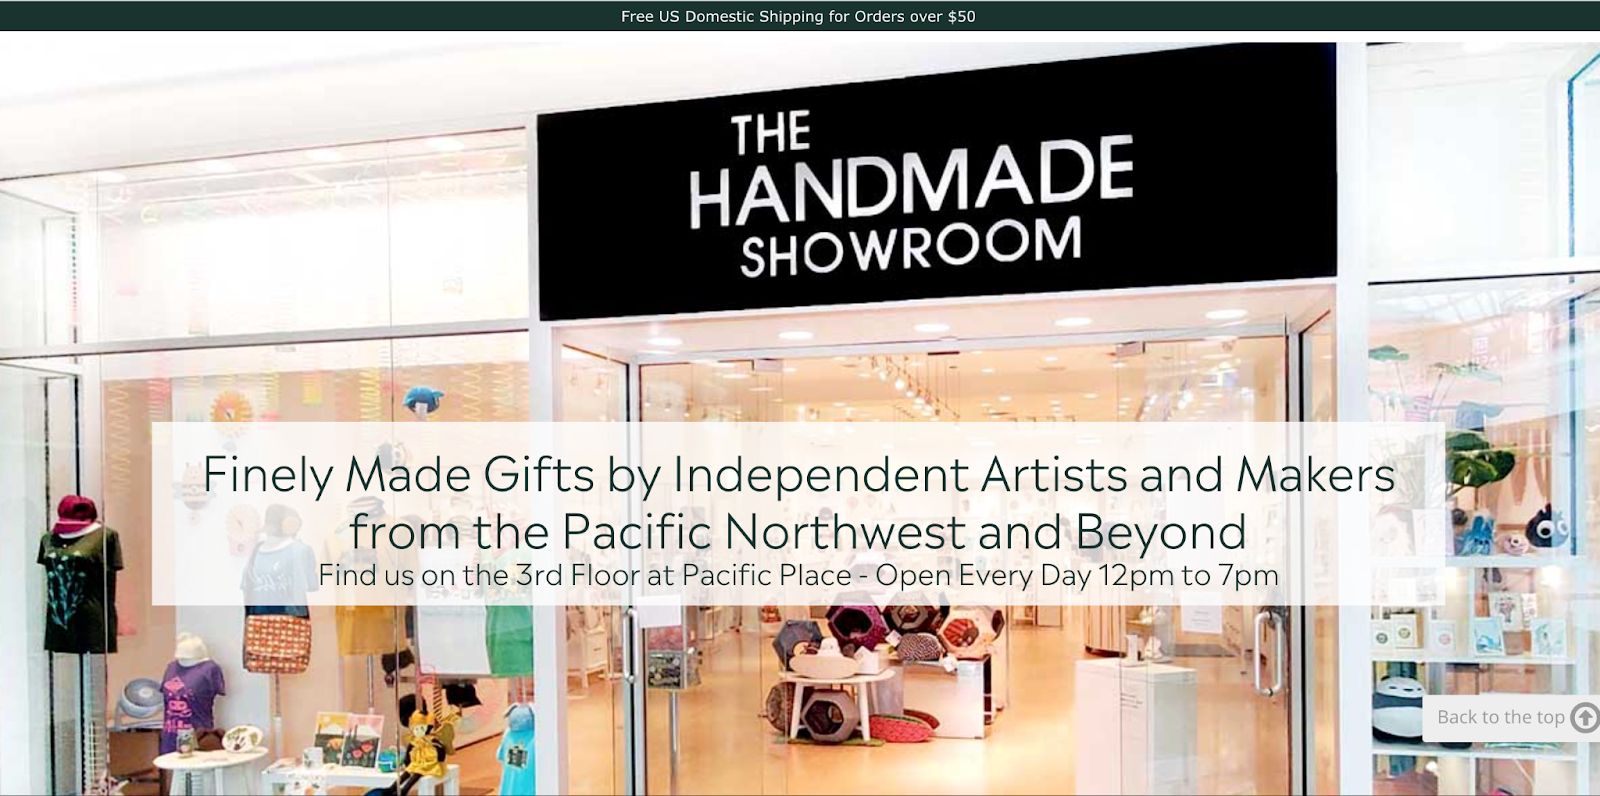 An online store selling handmade products.